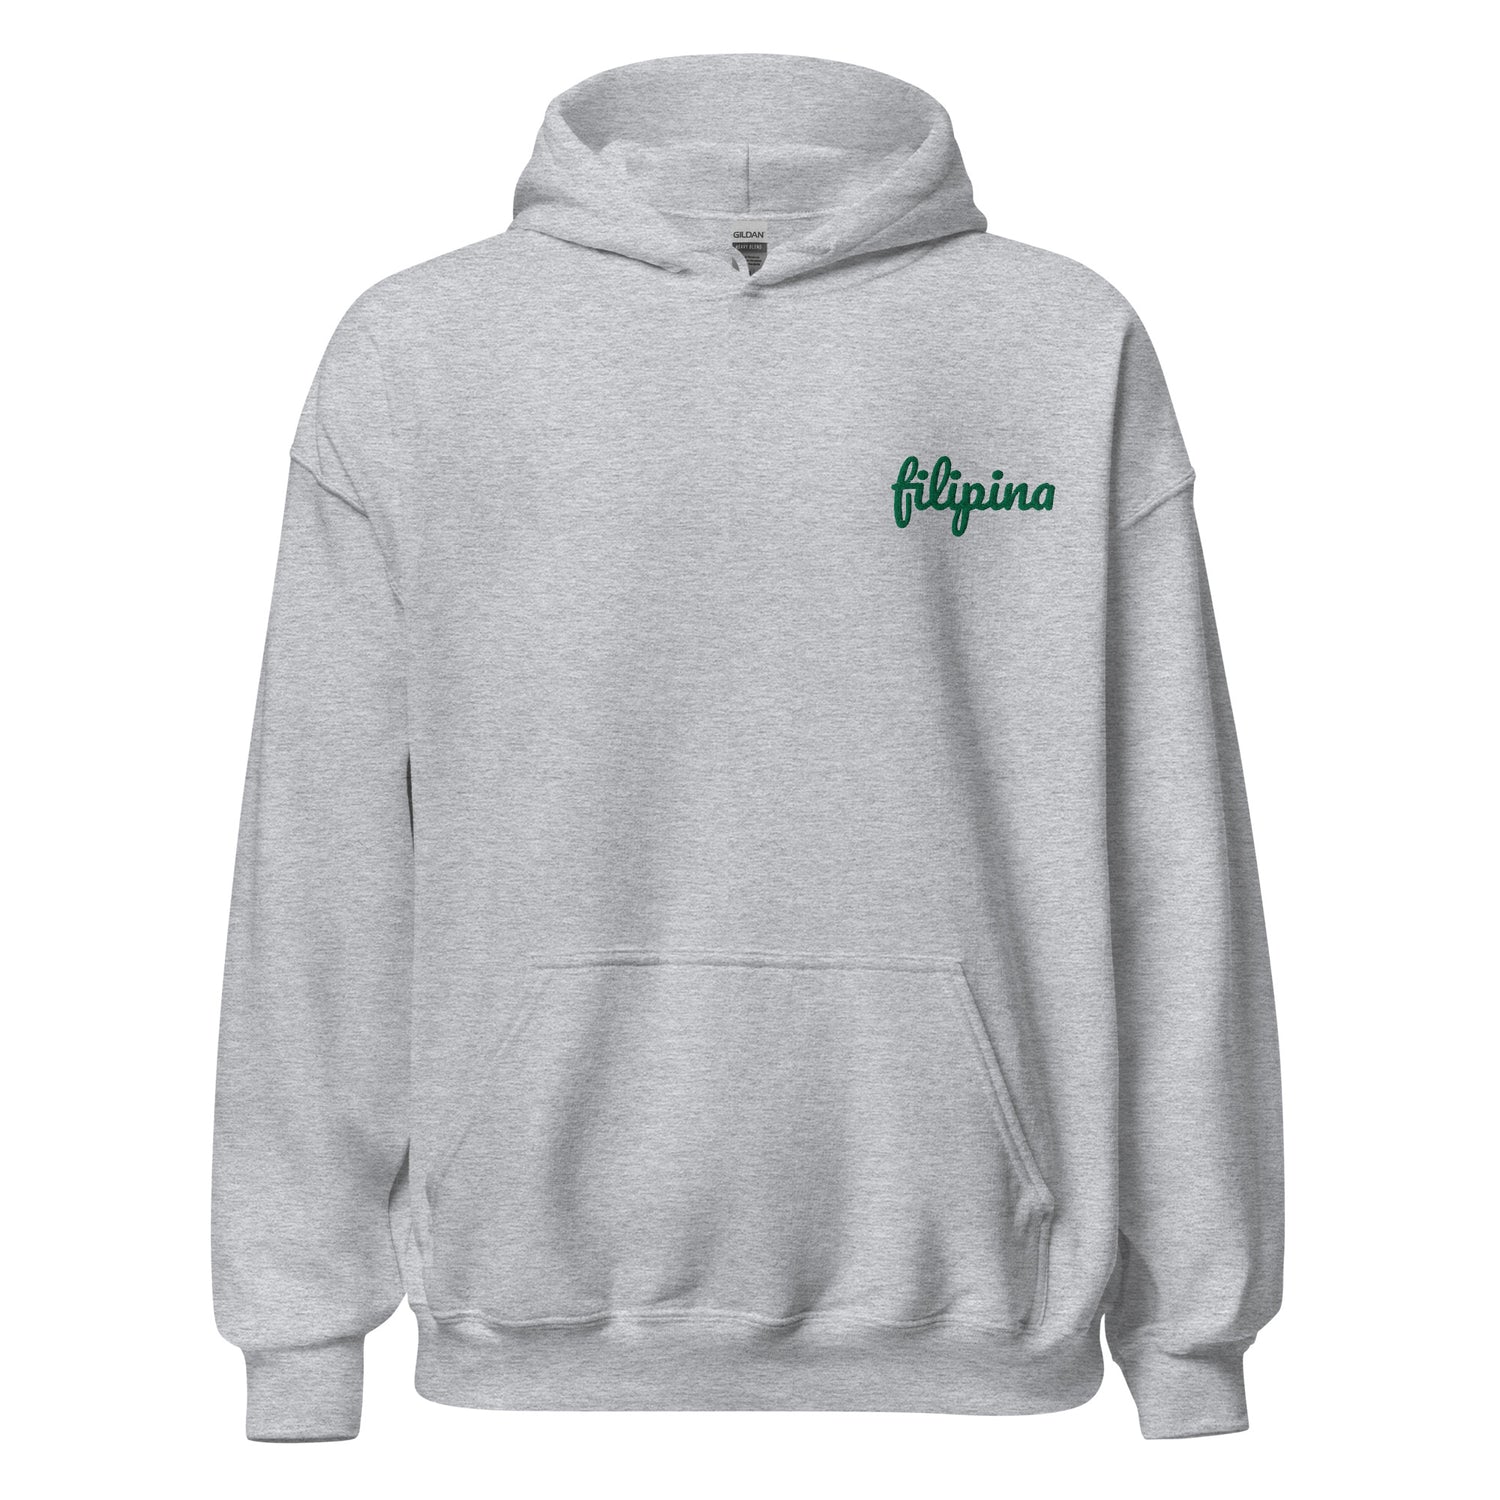 Filipino Hoodie Filipina Statement Embroidered Merch in color variant Sport Gray